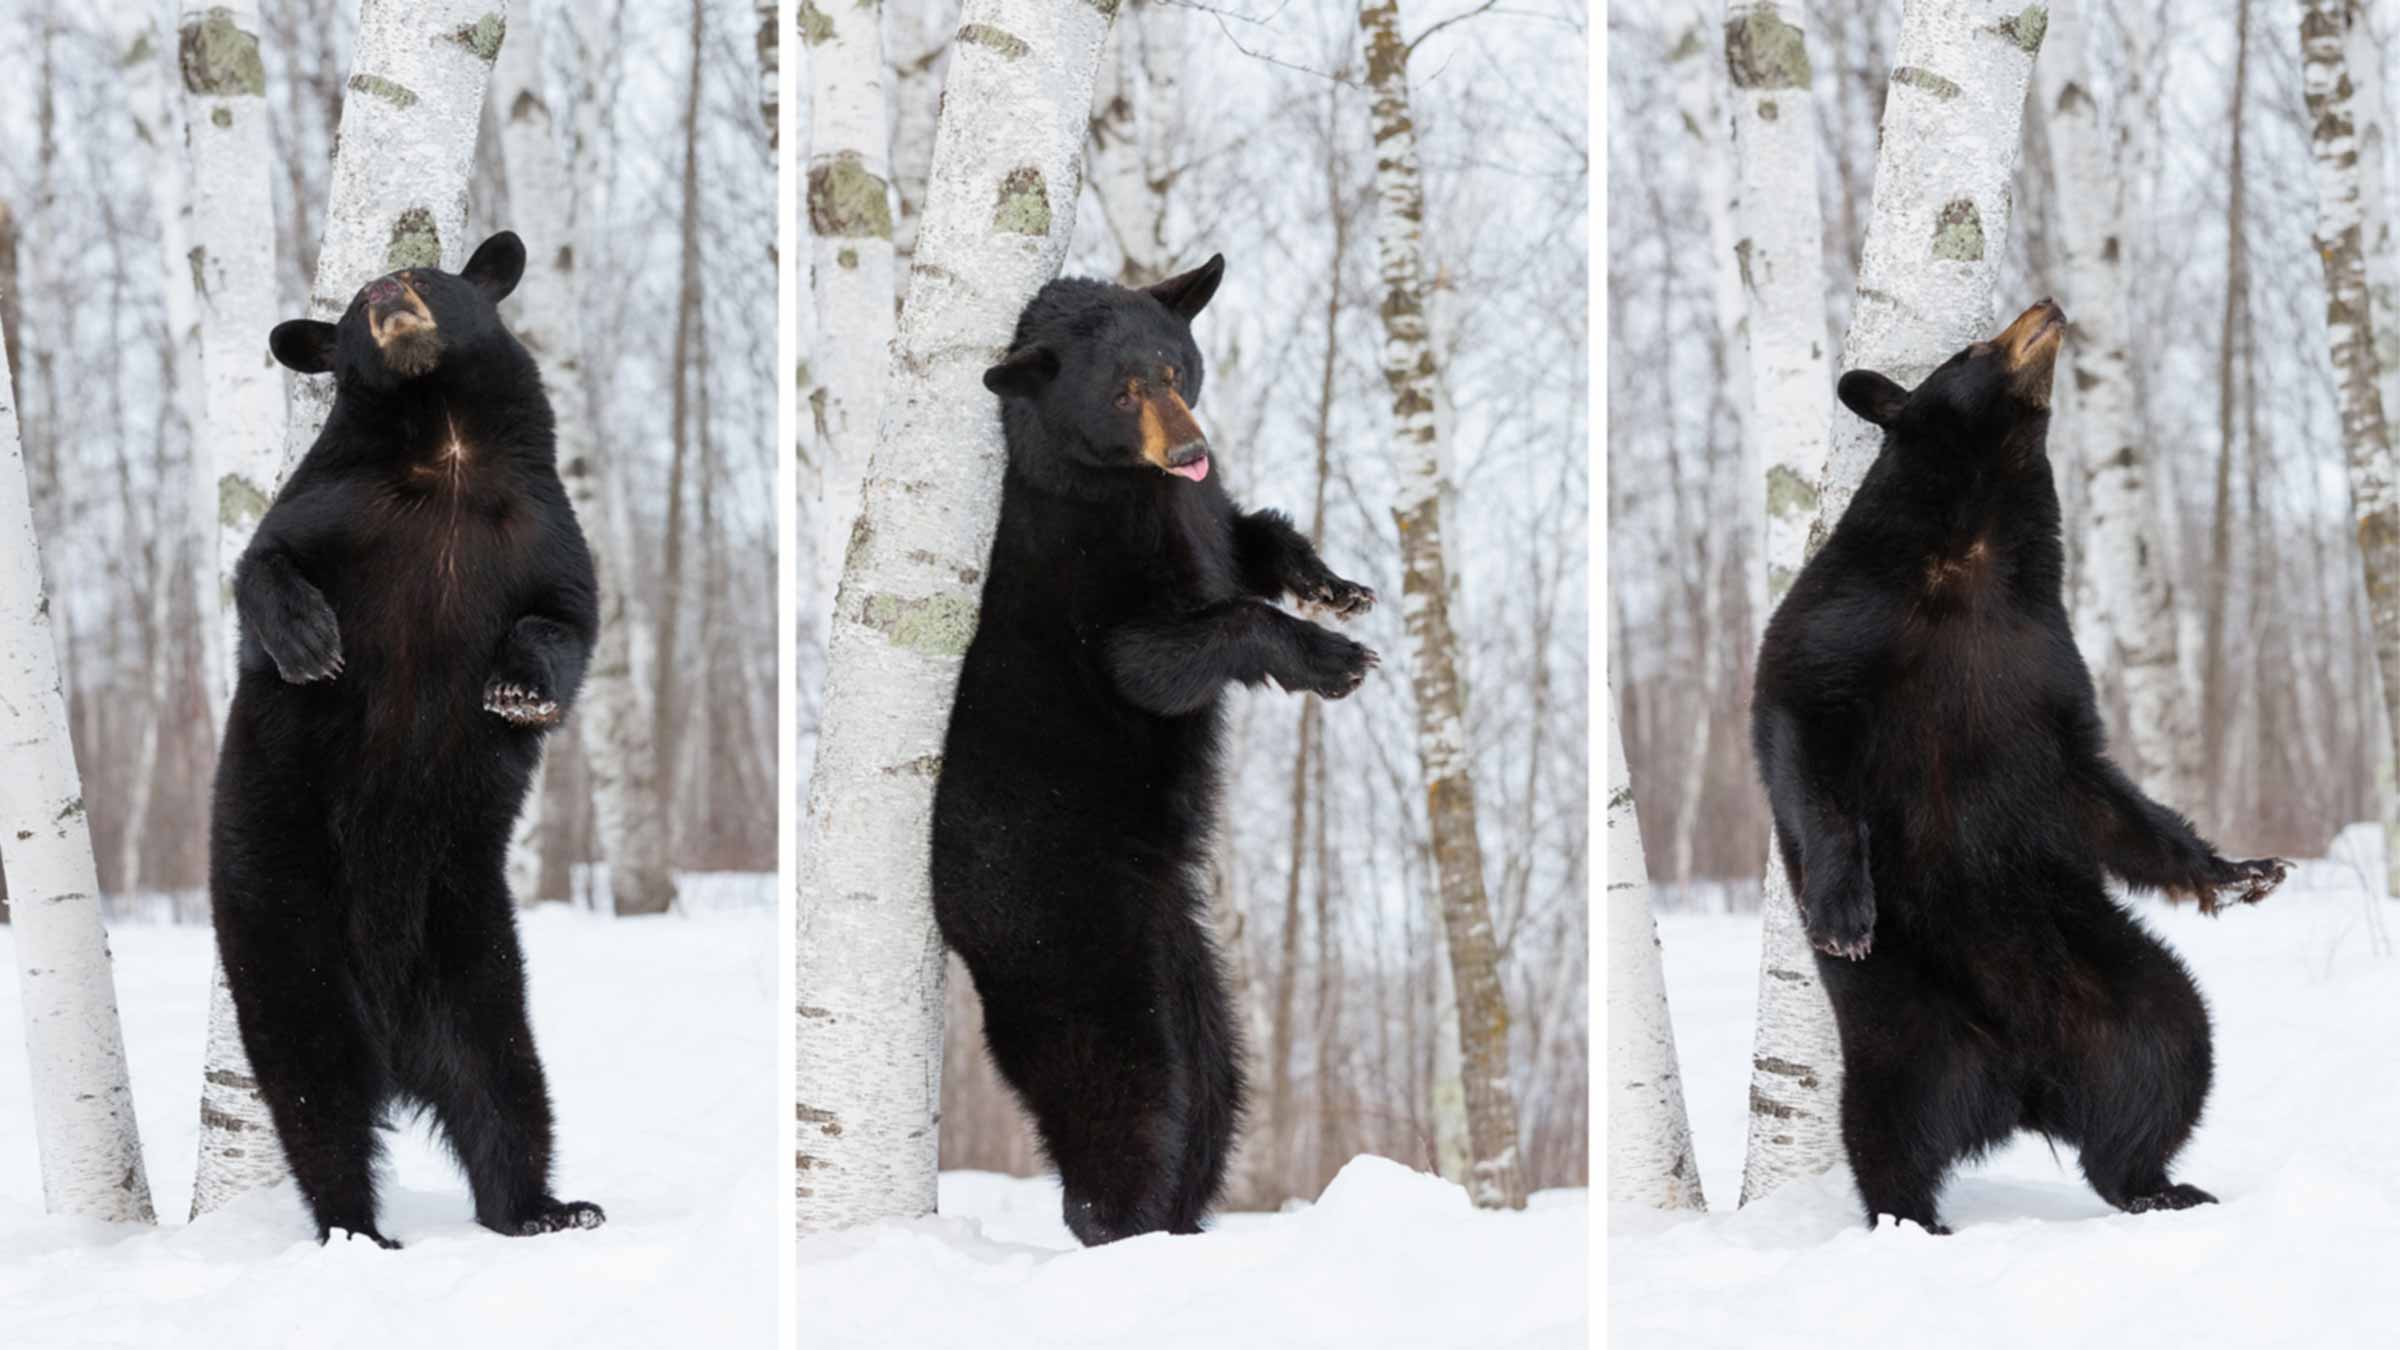 Black bear scratching its back on a tree in snowy forest